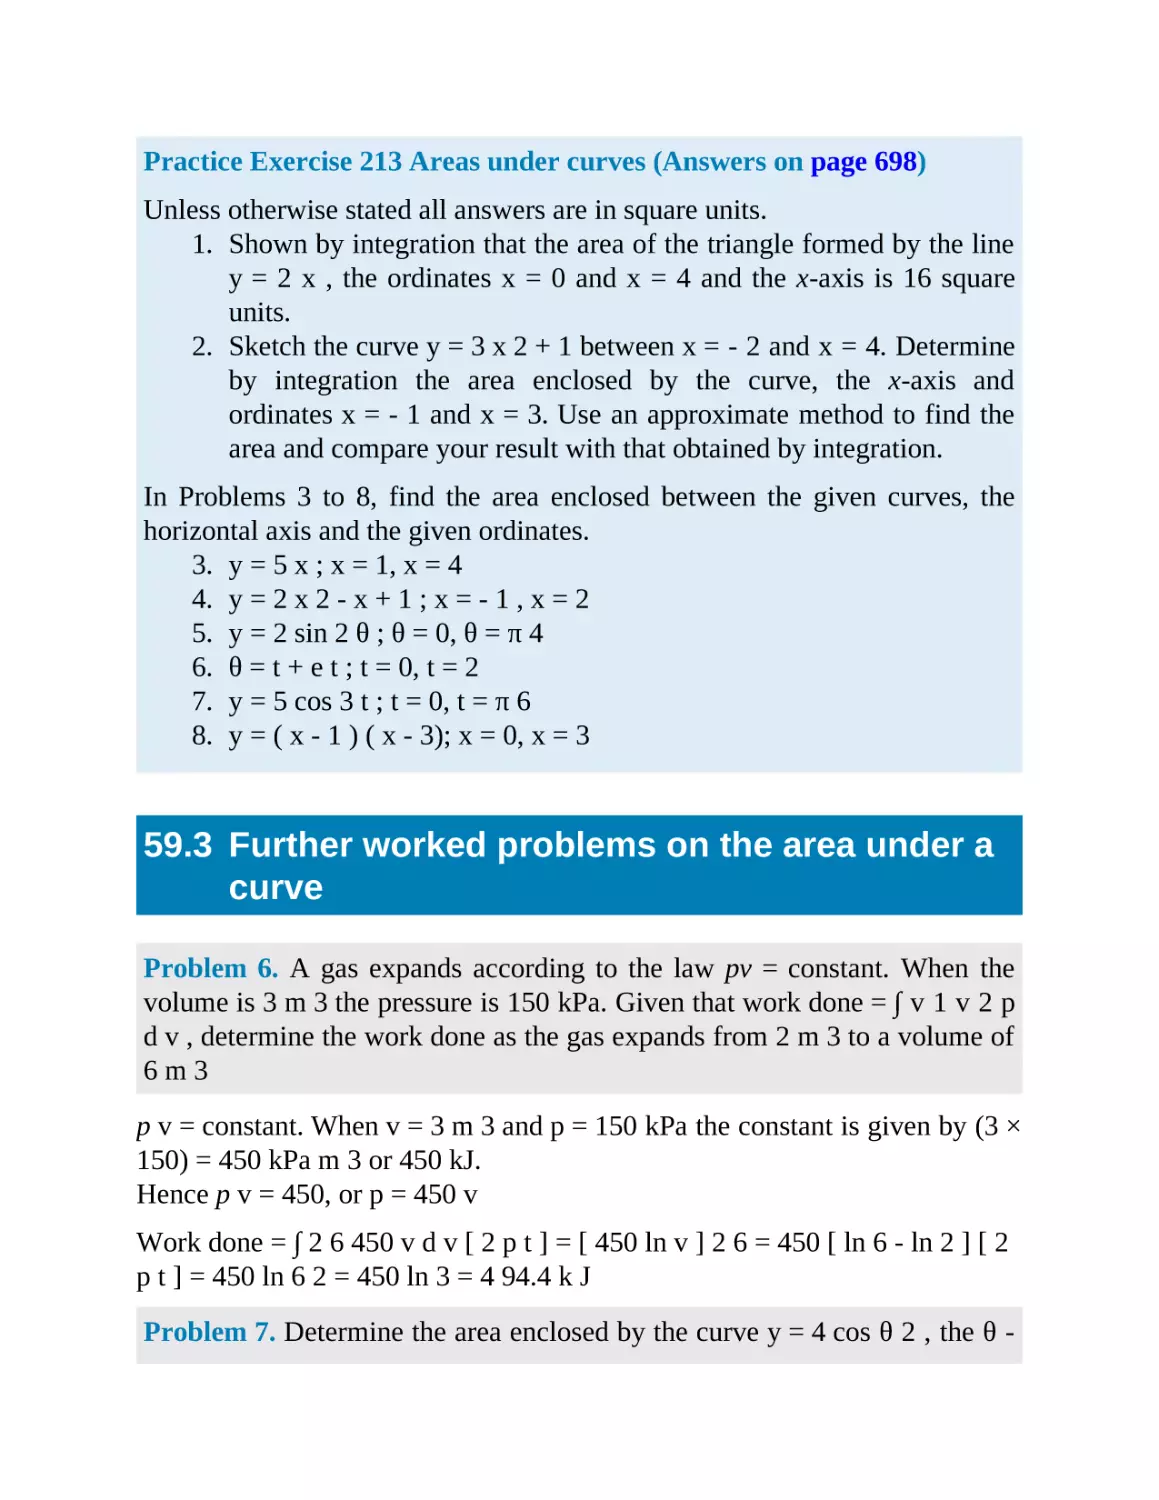 59.3 Further worked problems on the area under a curve